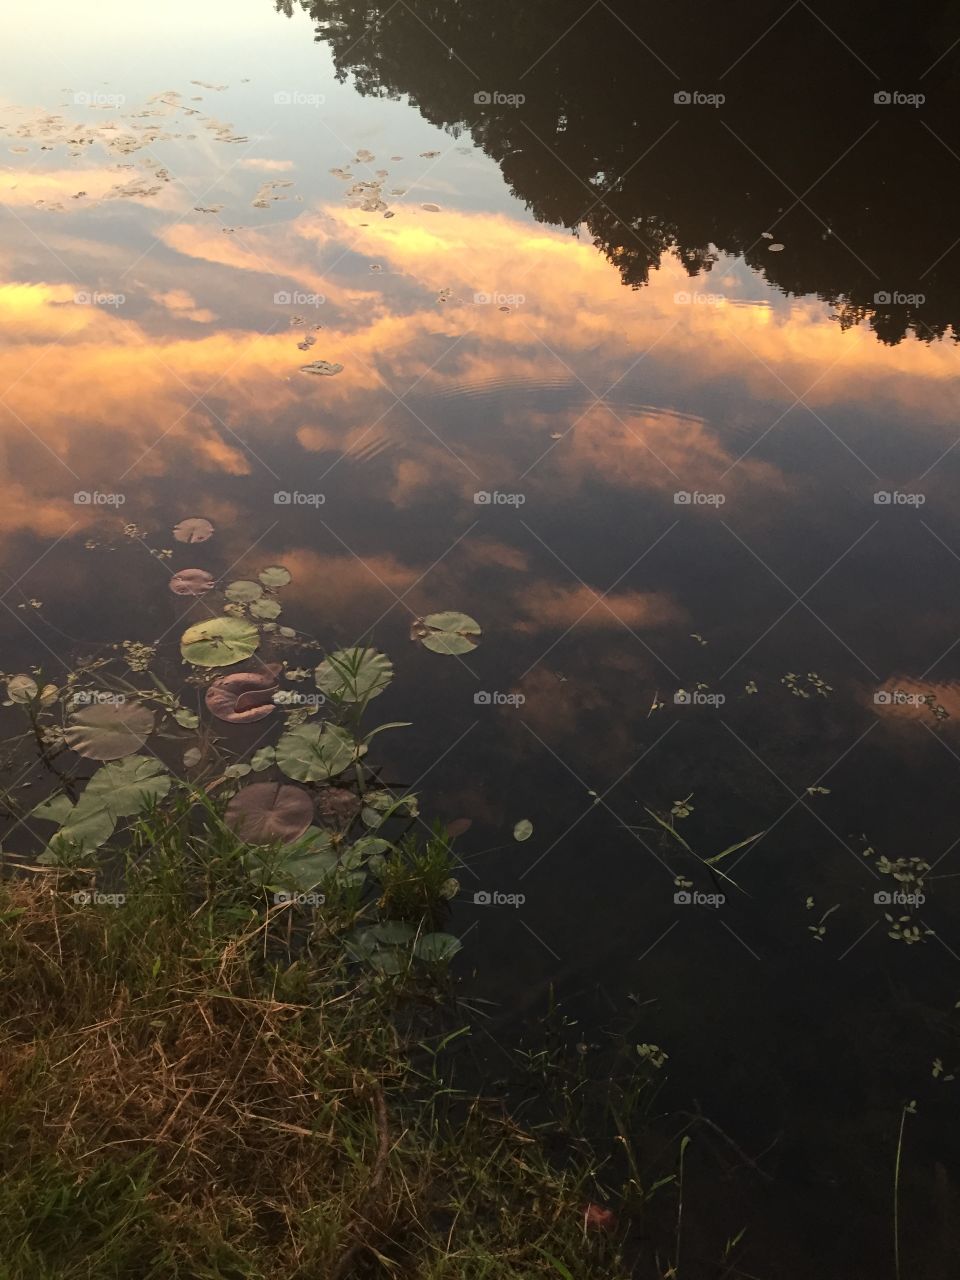 Sunset over lily pads at lake hope